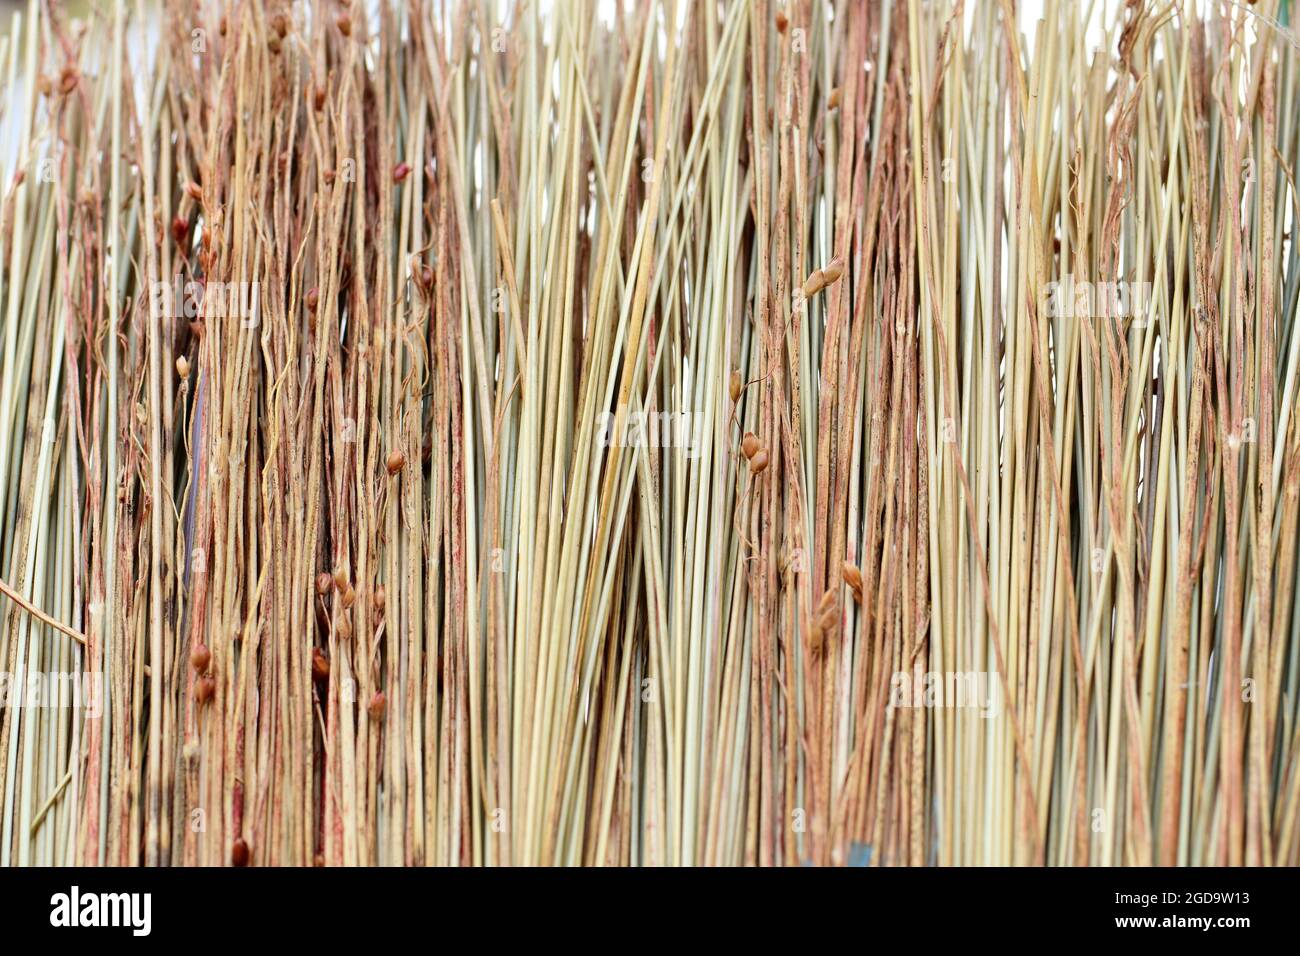 A straw broom as a close up Stock Photo